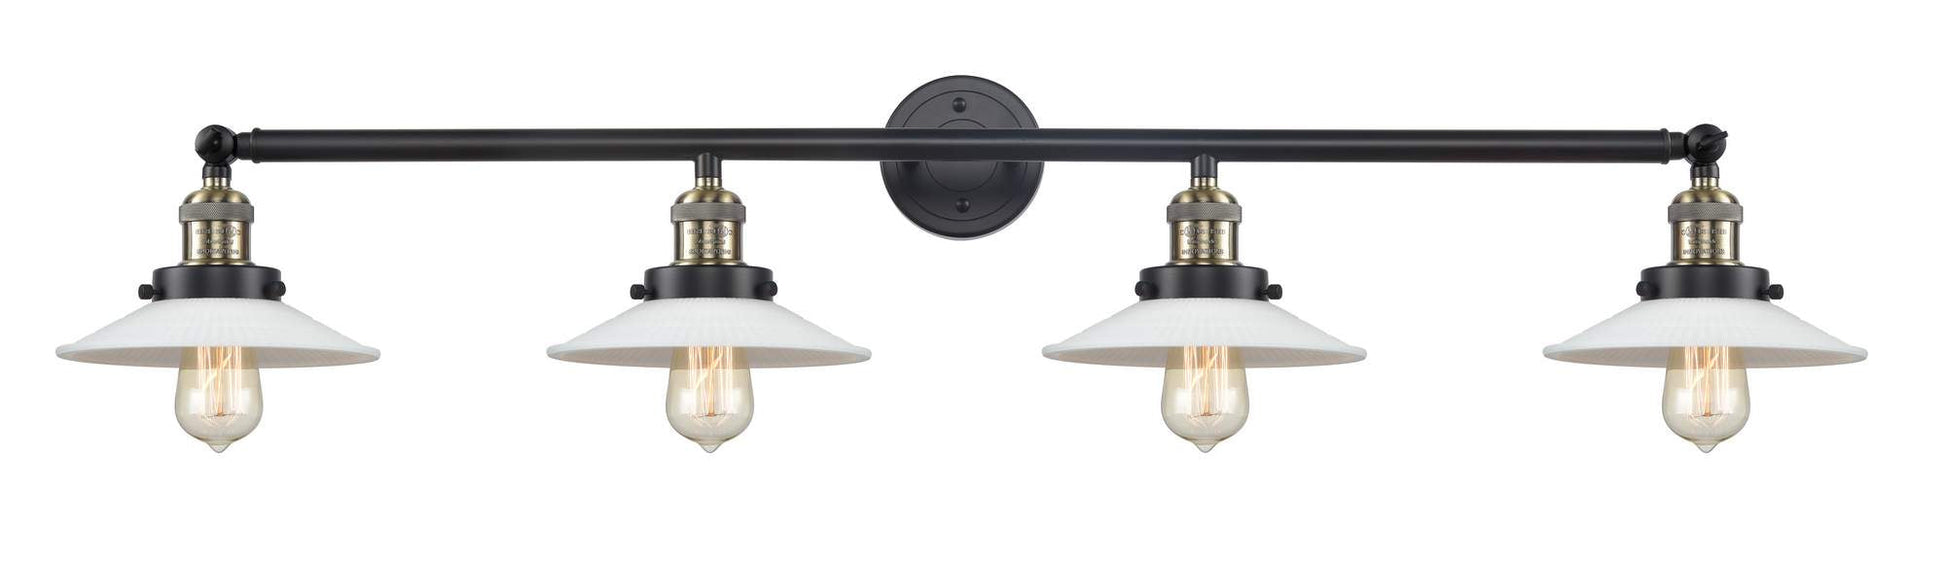 215-BAB-G1 4-Light 44.5" Black Antique Brass Bath Vanity Light - White Halophane Glass - LED Bulb - Dimmensions: 44.5 x 9 x 6.5 - Glass Up or Down: Yes